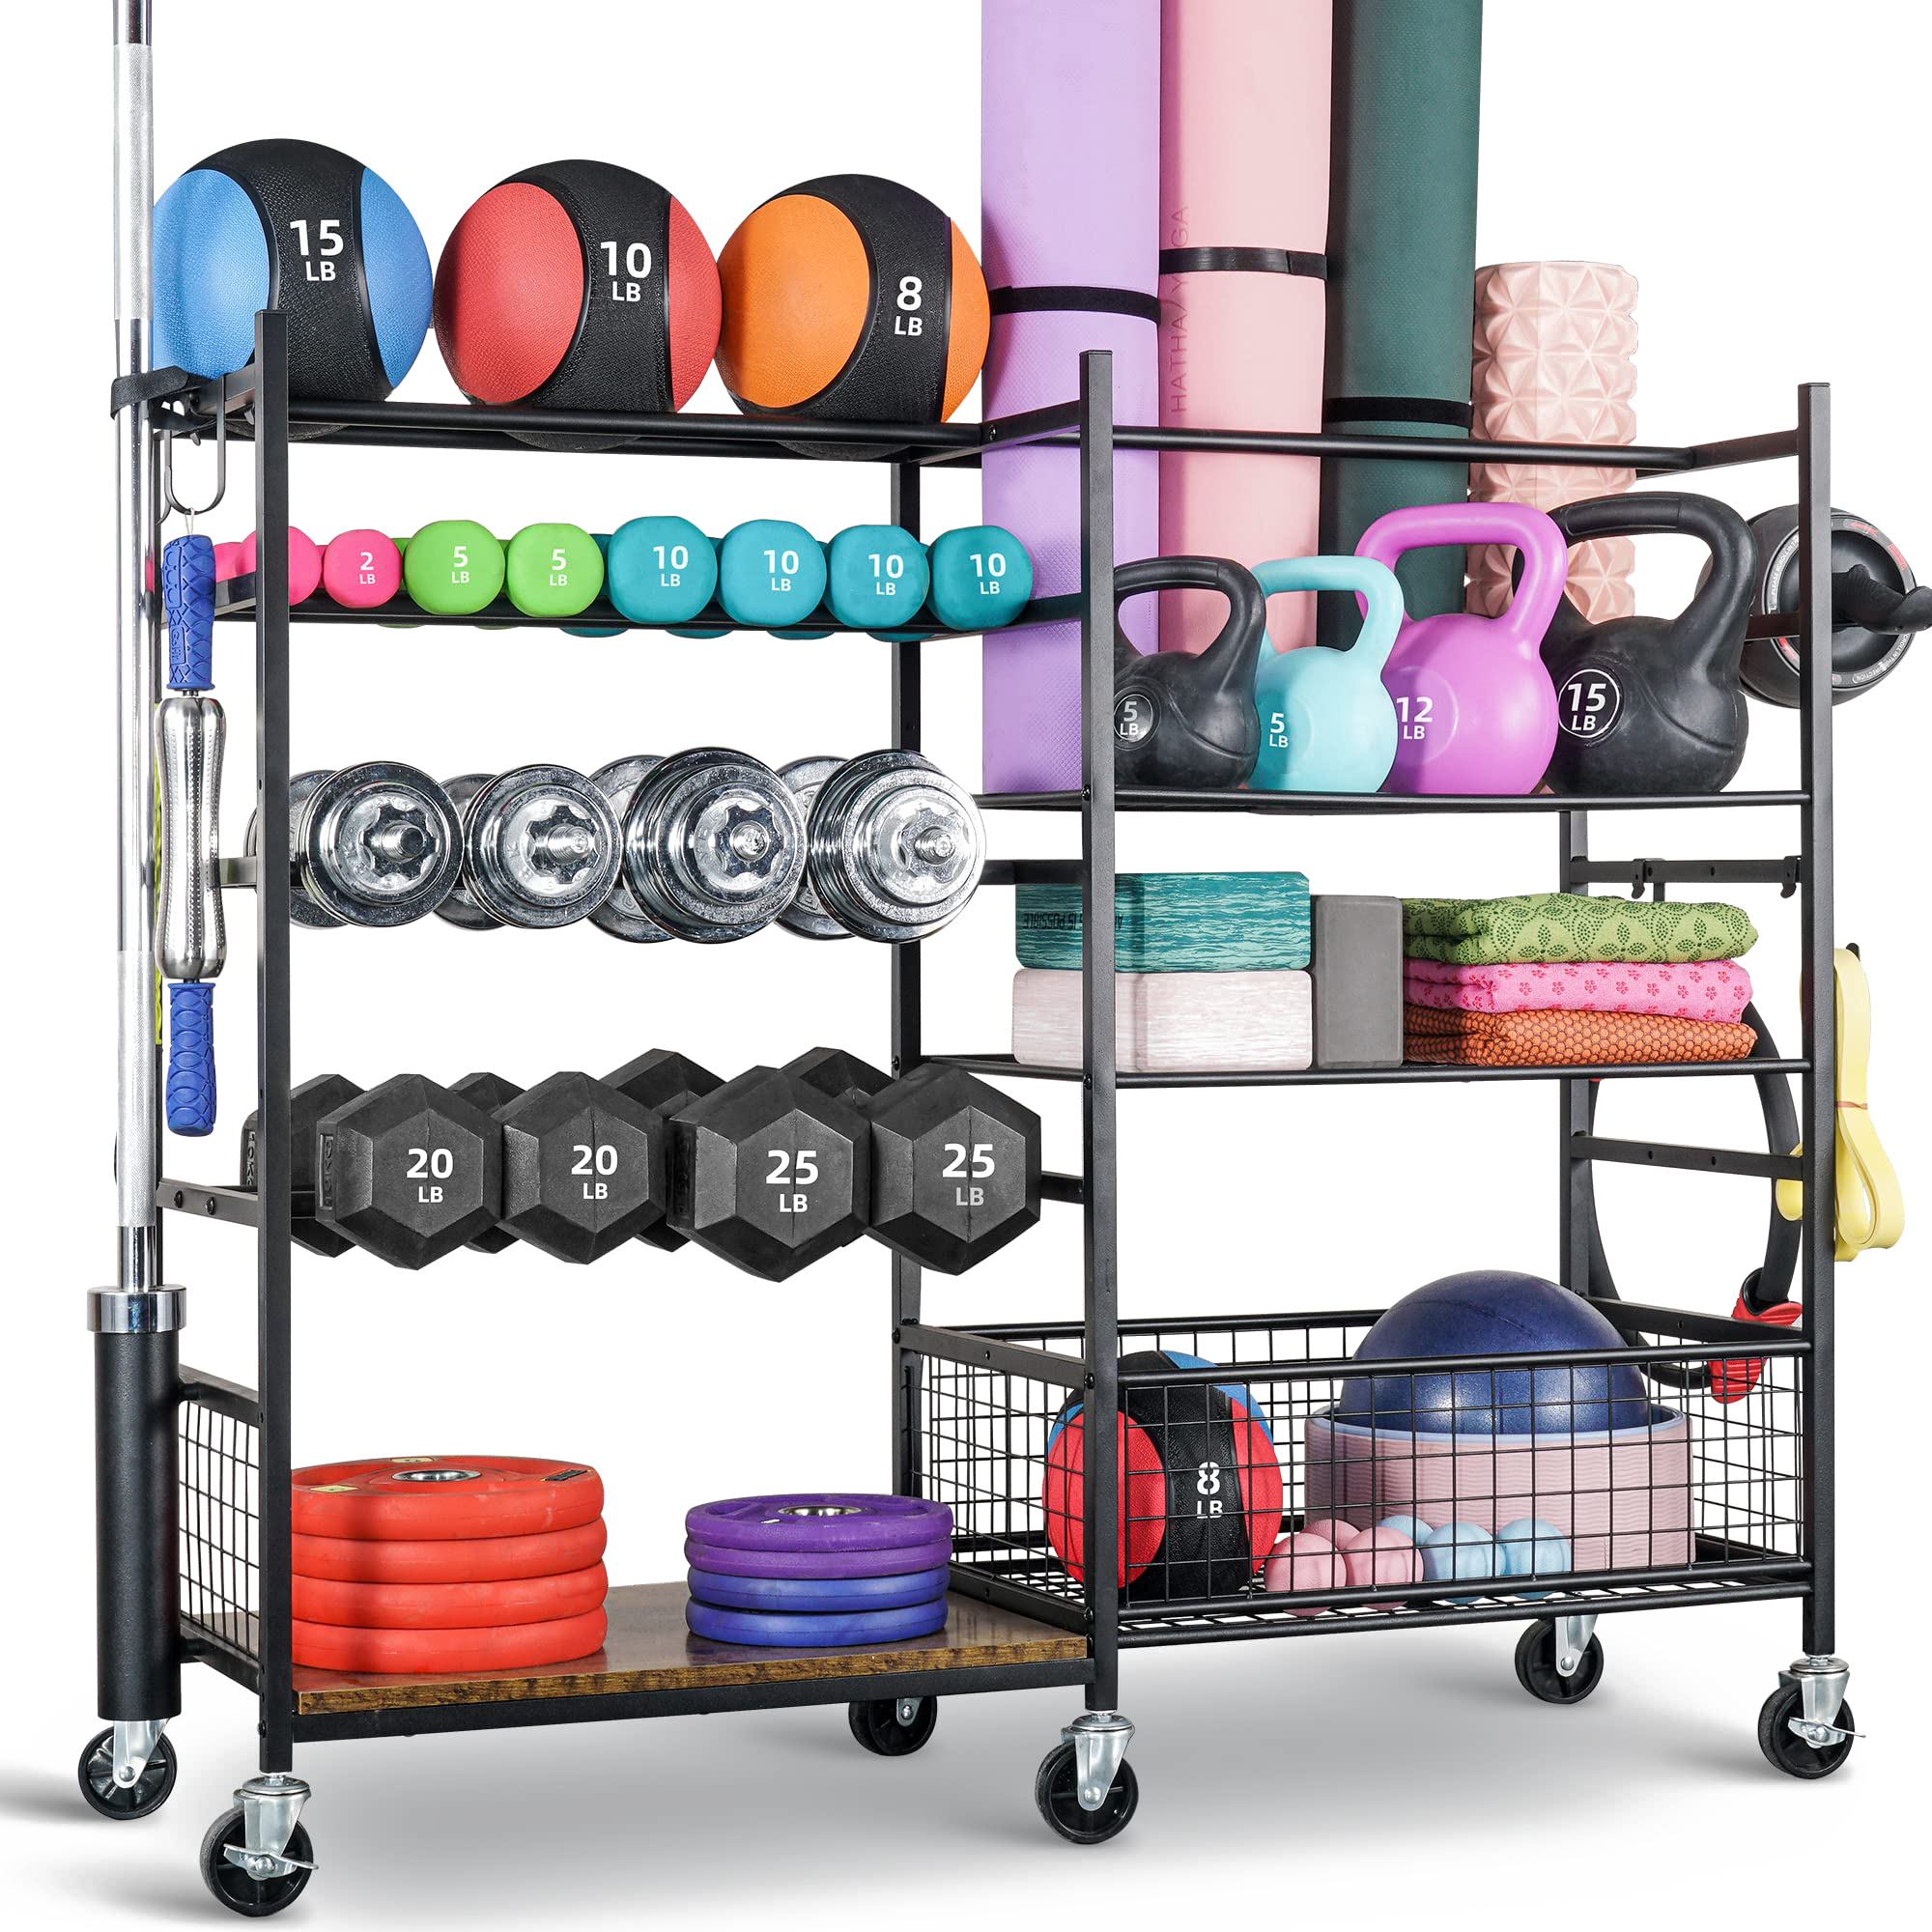 PLKOW Dumbbell Rack, Weight Rack for Dumbbells, Home Gym Storage for Dumbbells Kettlebells Yoga Mat and Balls, All in One Workout Storage with Wheels and Hooks, Powder Coated Finish Steel